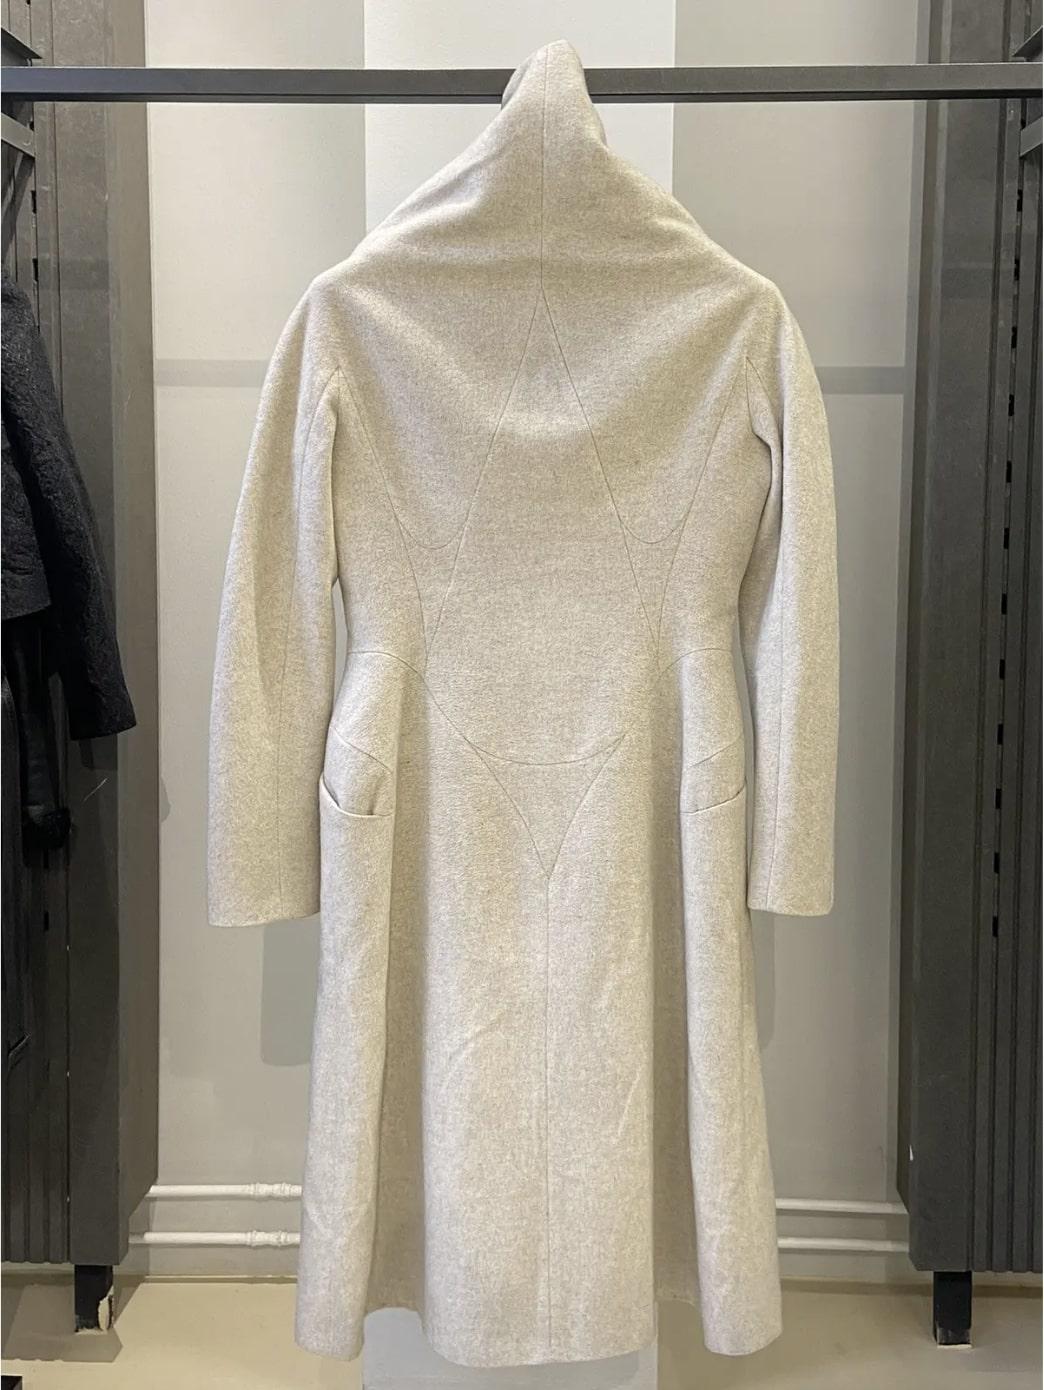 Alexander McQueen
FW 2004 'PANTHEON AS LECUM' Cashmere Coat
Size 44

Stunning Alexander McQueen Cashmere coat from his Fall Winter 2004 collection. In great condition without any flaws. Tagged a size 44. As seen on the runway in the leather version,